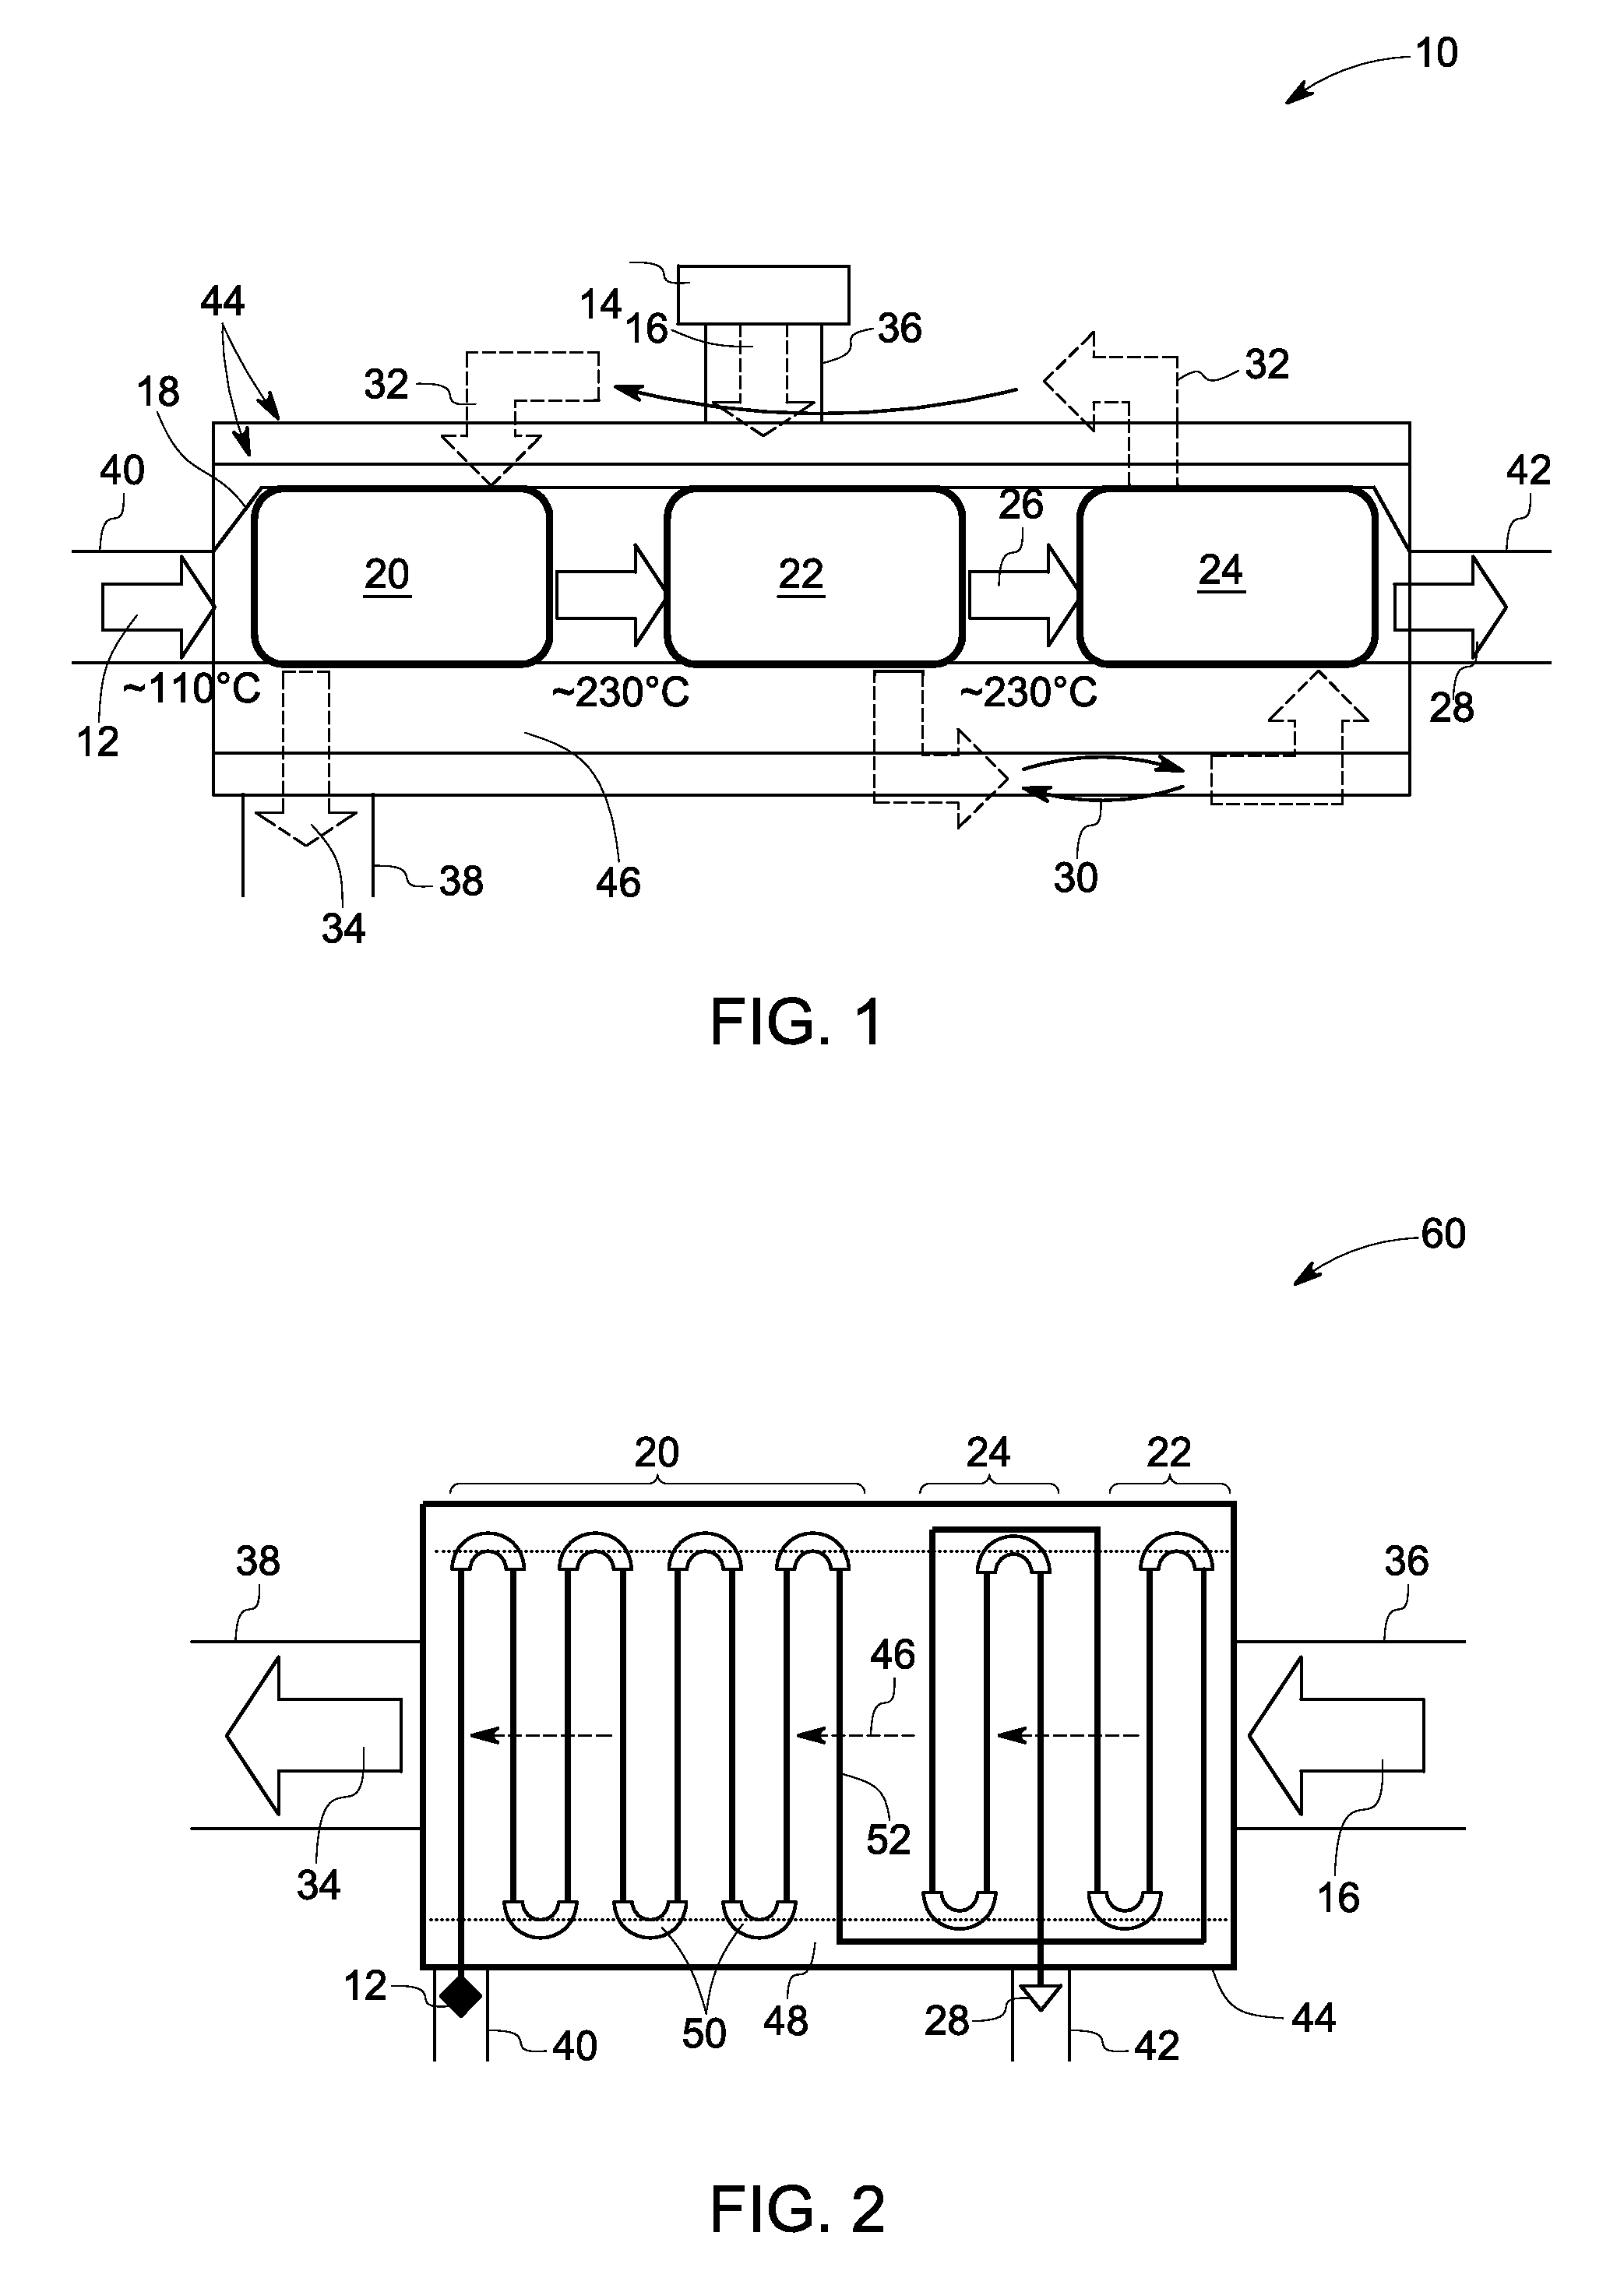 Direct evaporator apparatus and energy recovery system